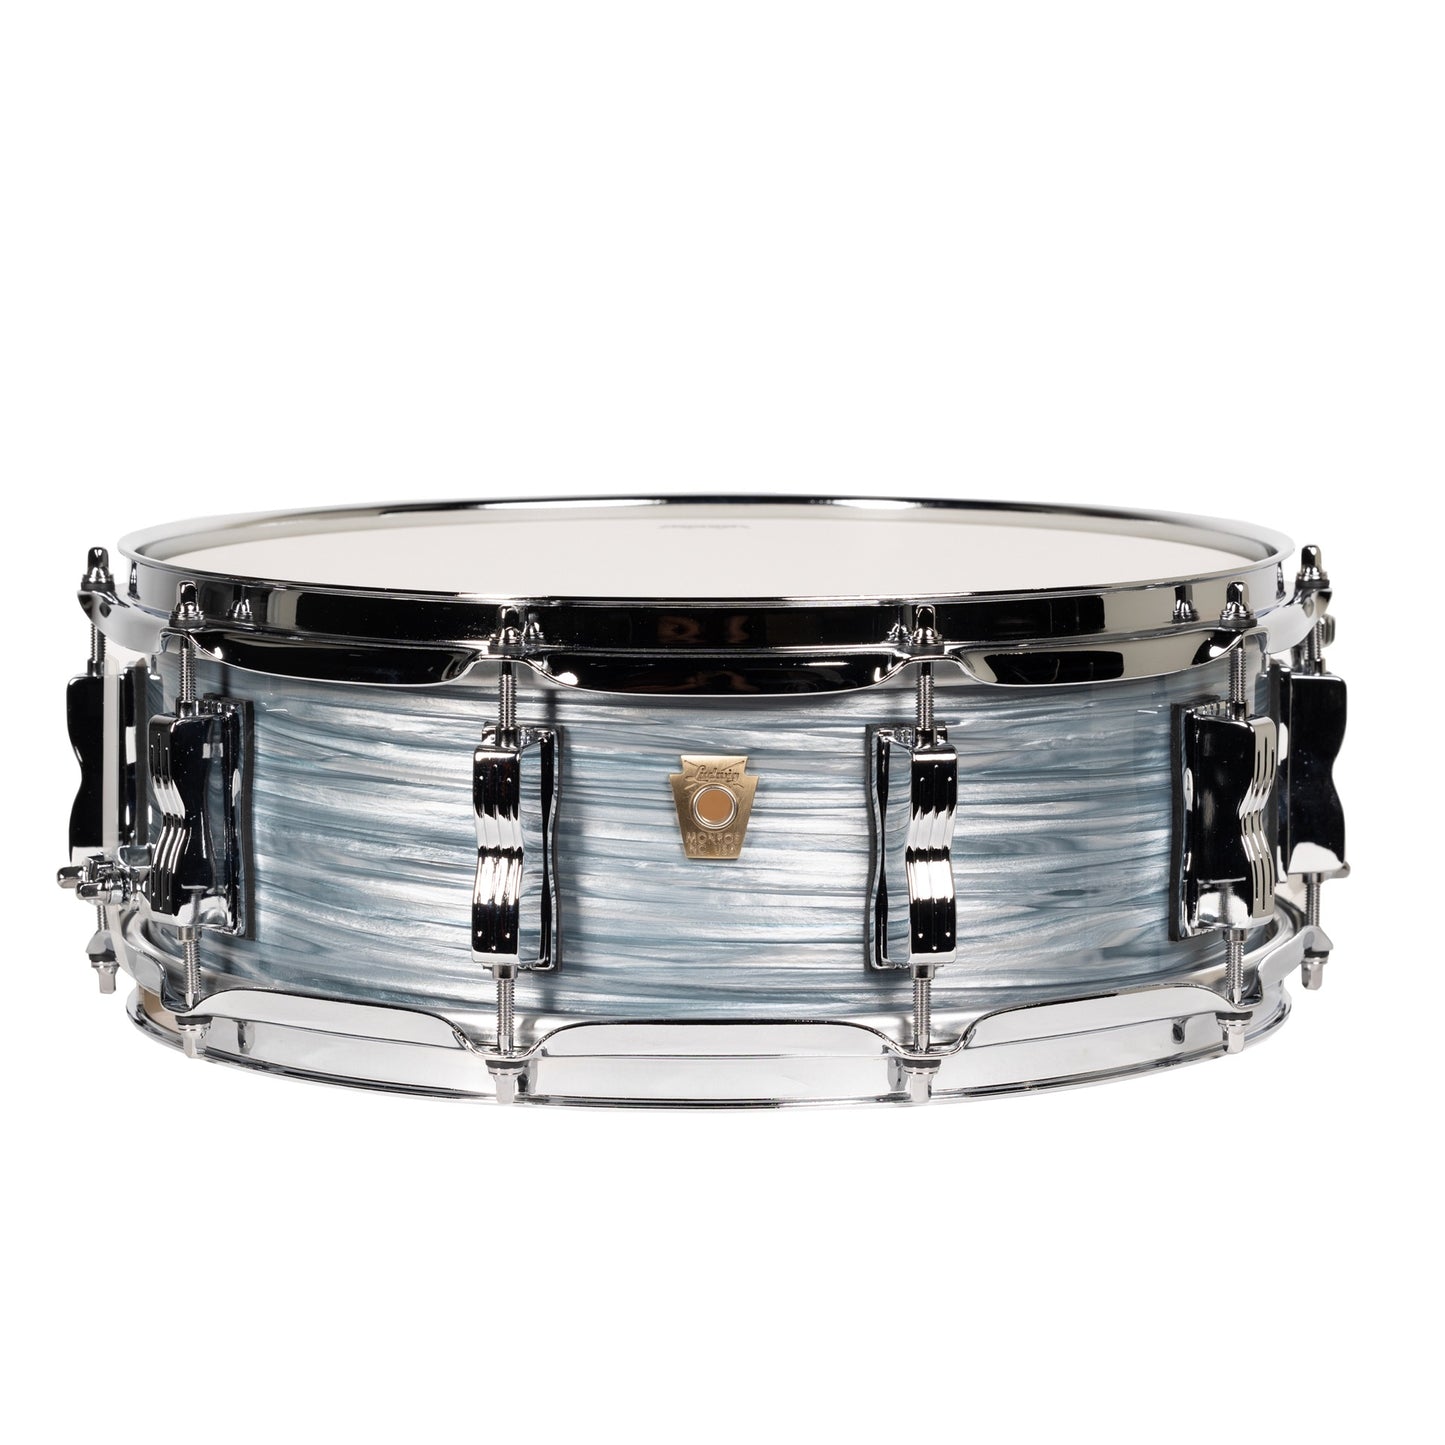 Ludwig Classic Maple 5x14 Snare Drum - Lemon Oyster